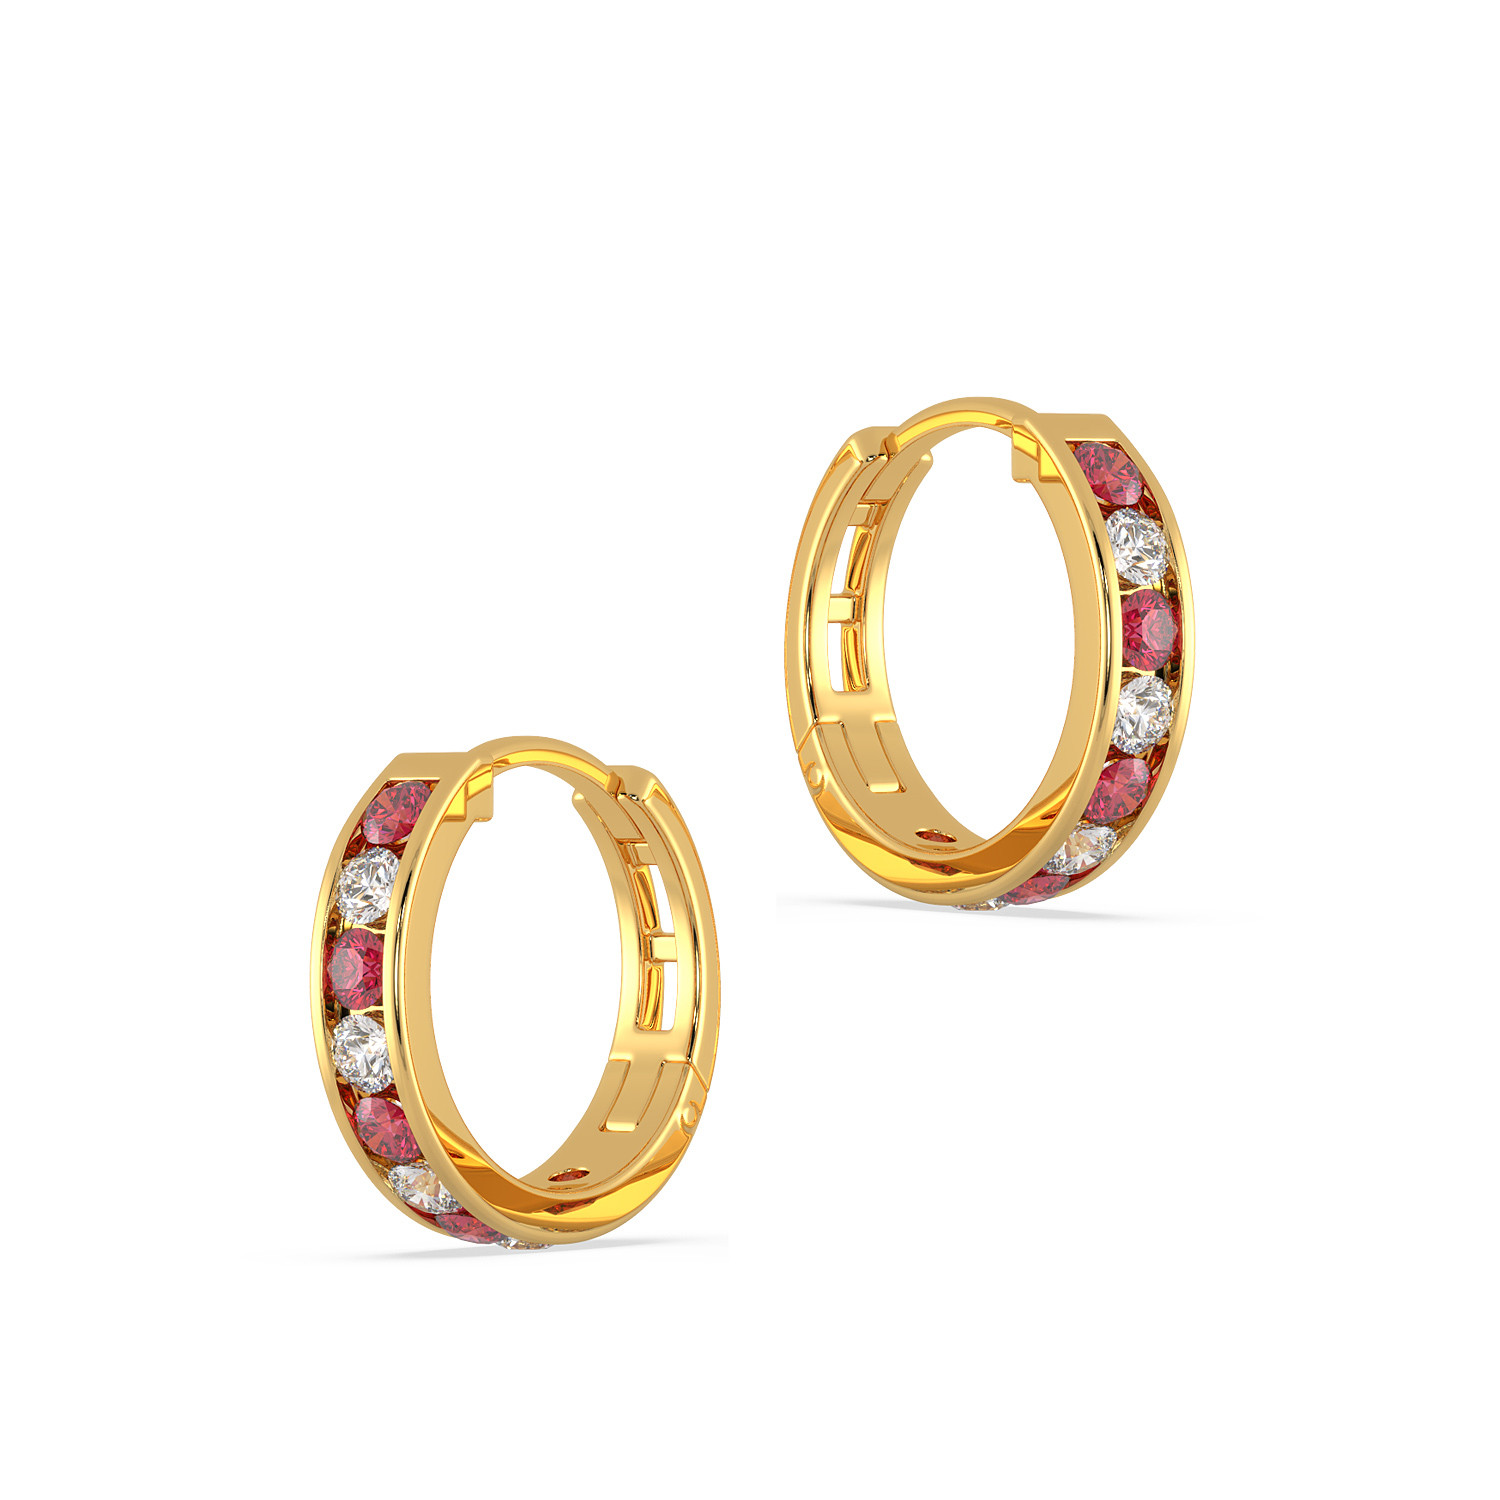 Yaalz Bali Ring Earring With Pearls In Maroon Color